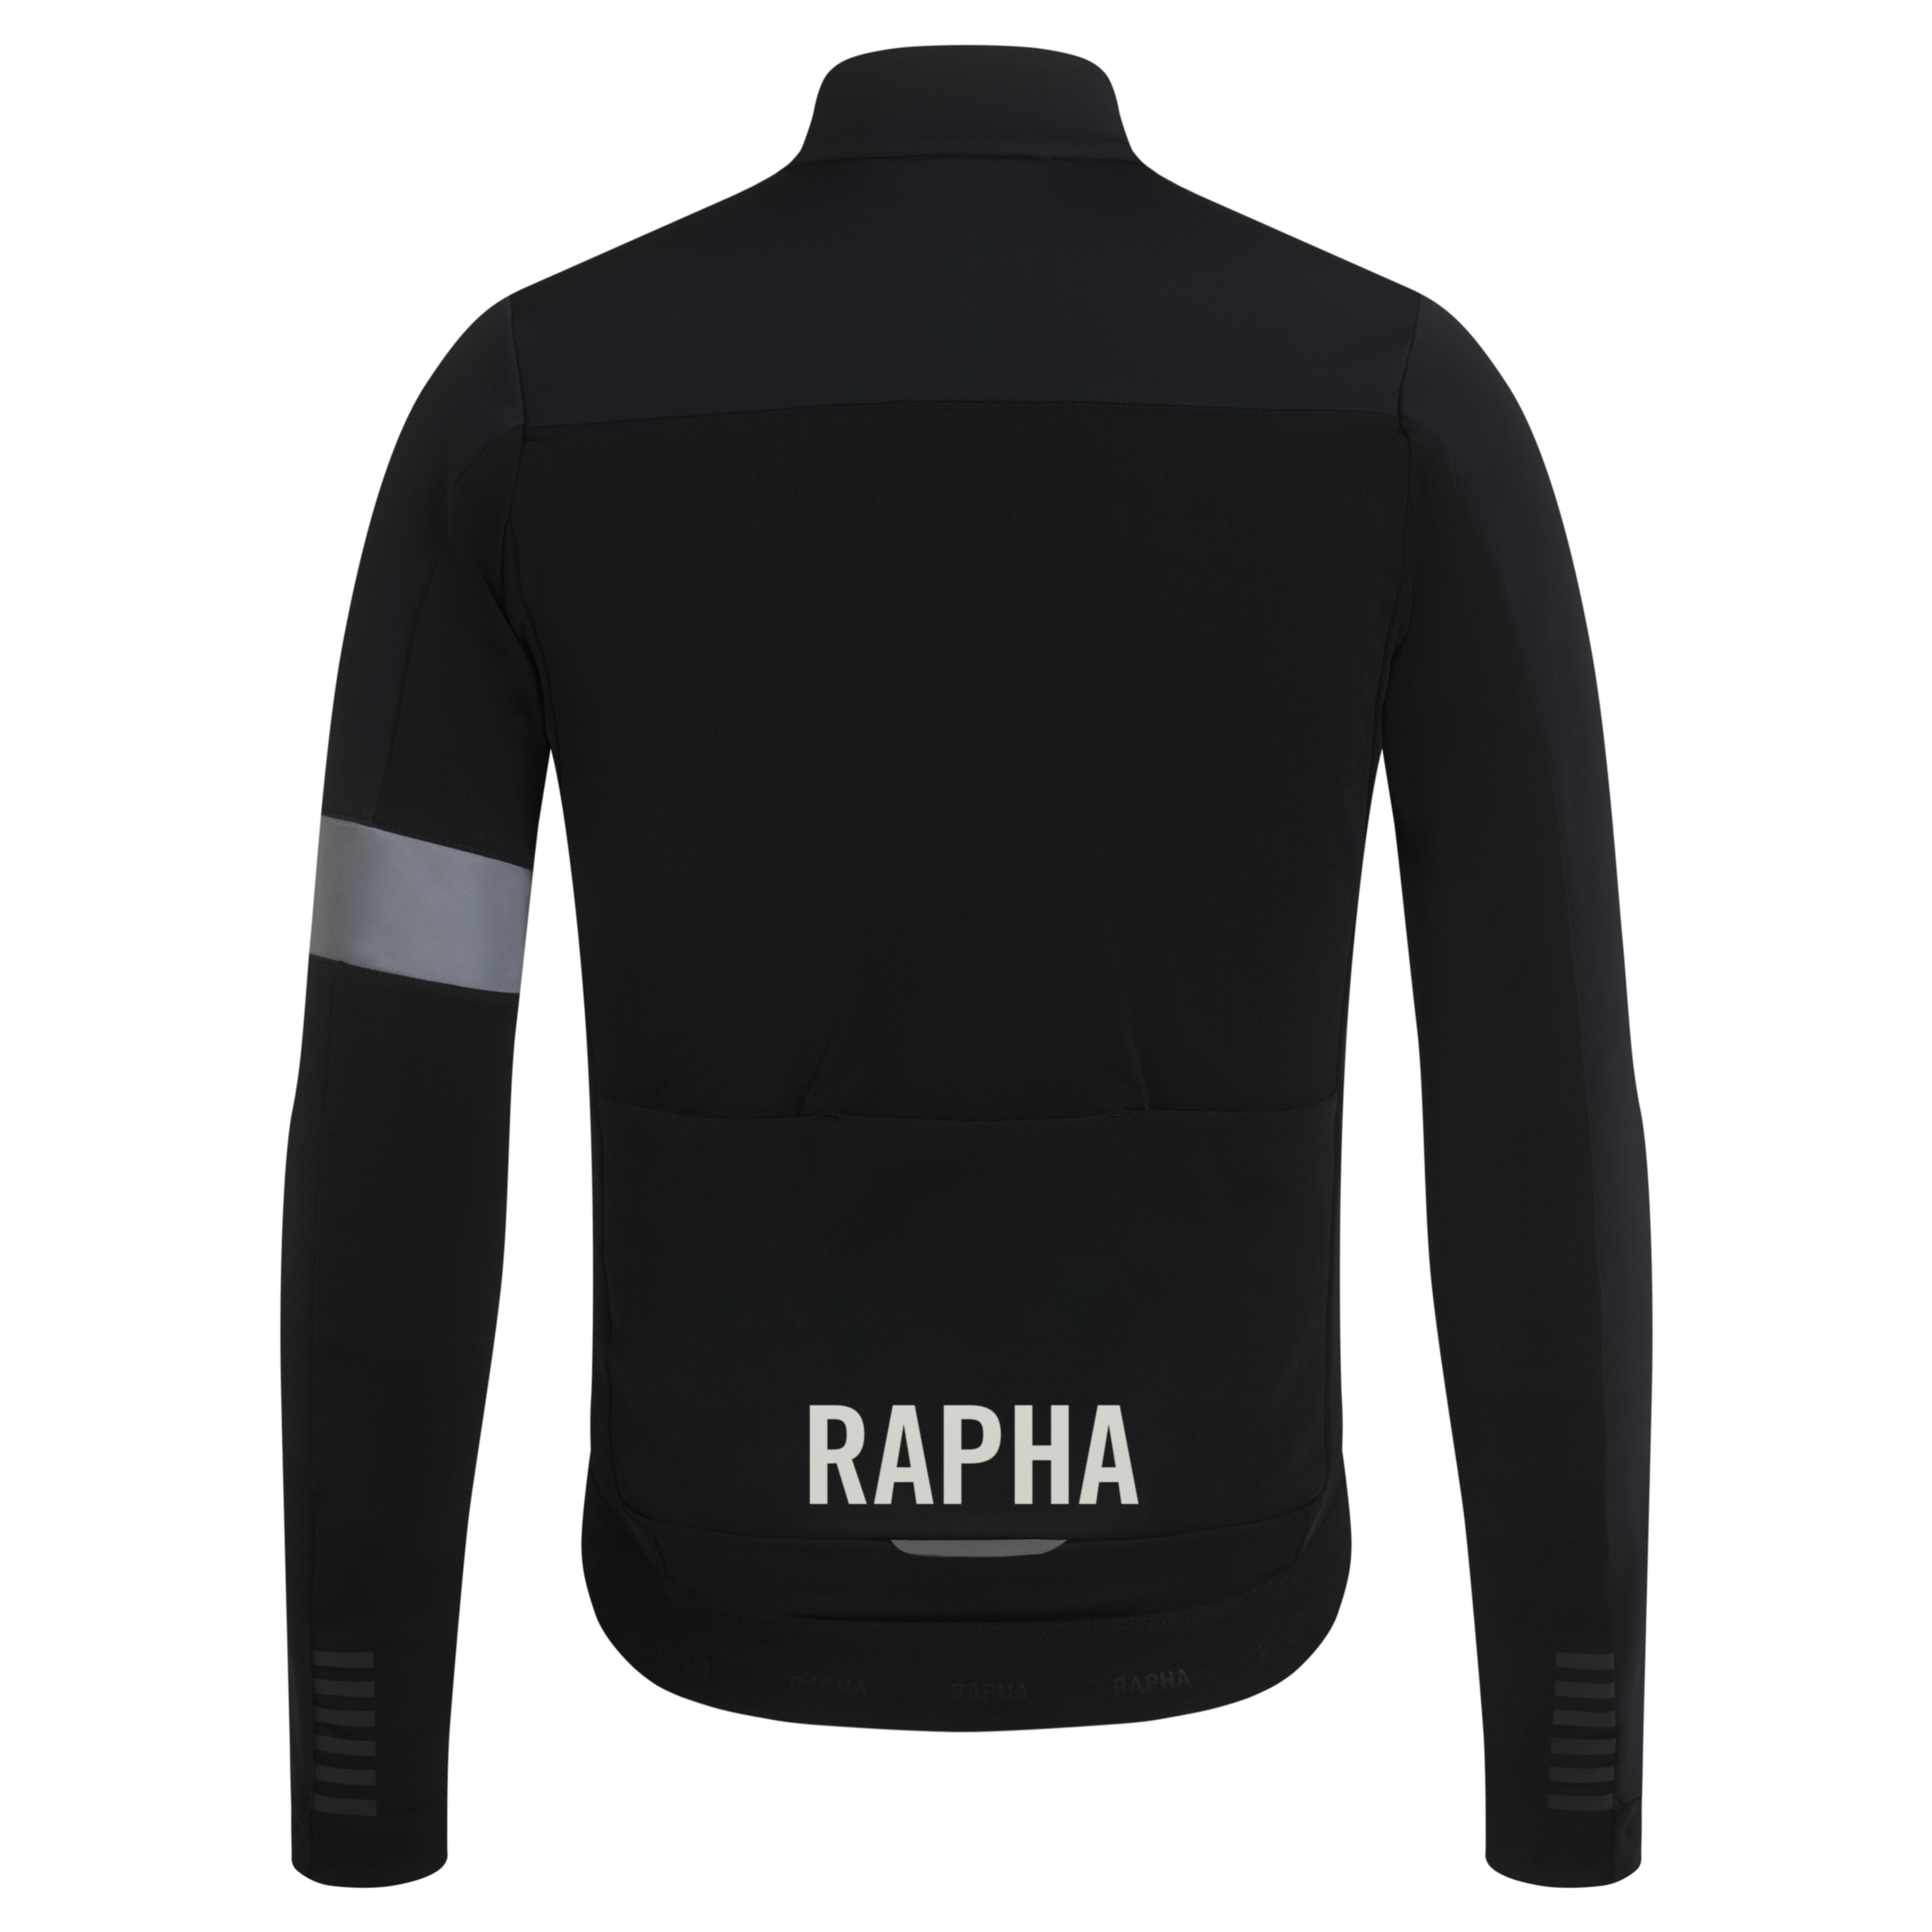 Men's Pro Team Thermal Base layer with Collar, Winter Cold Weather Cycling